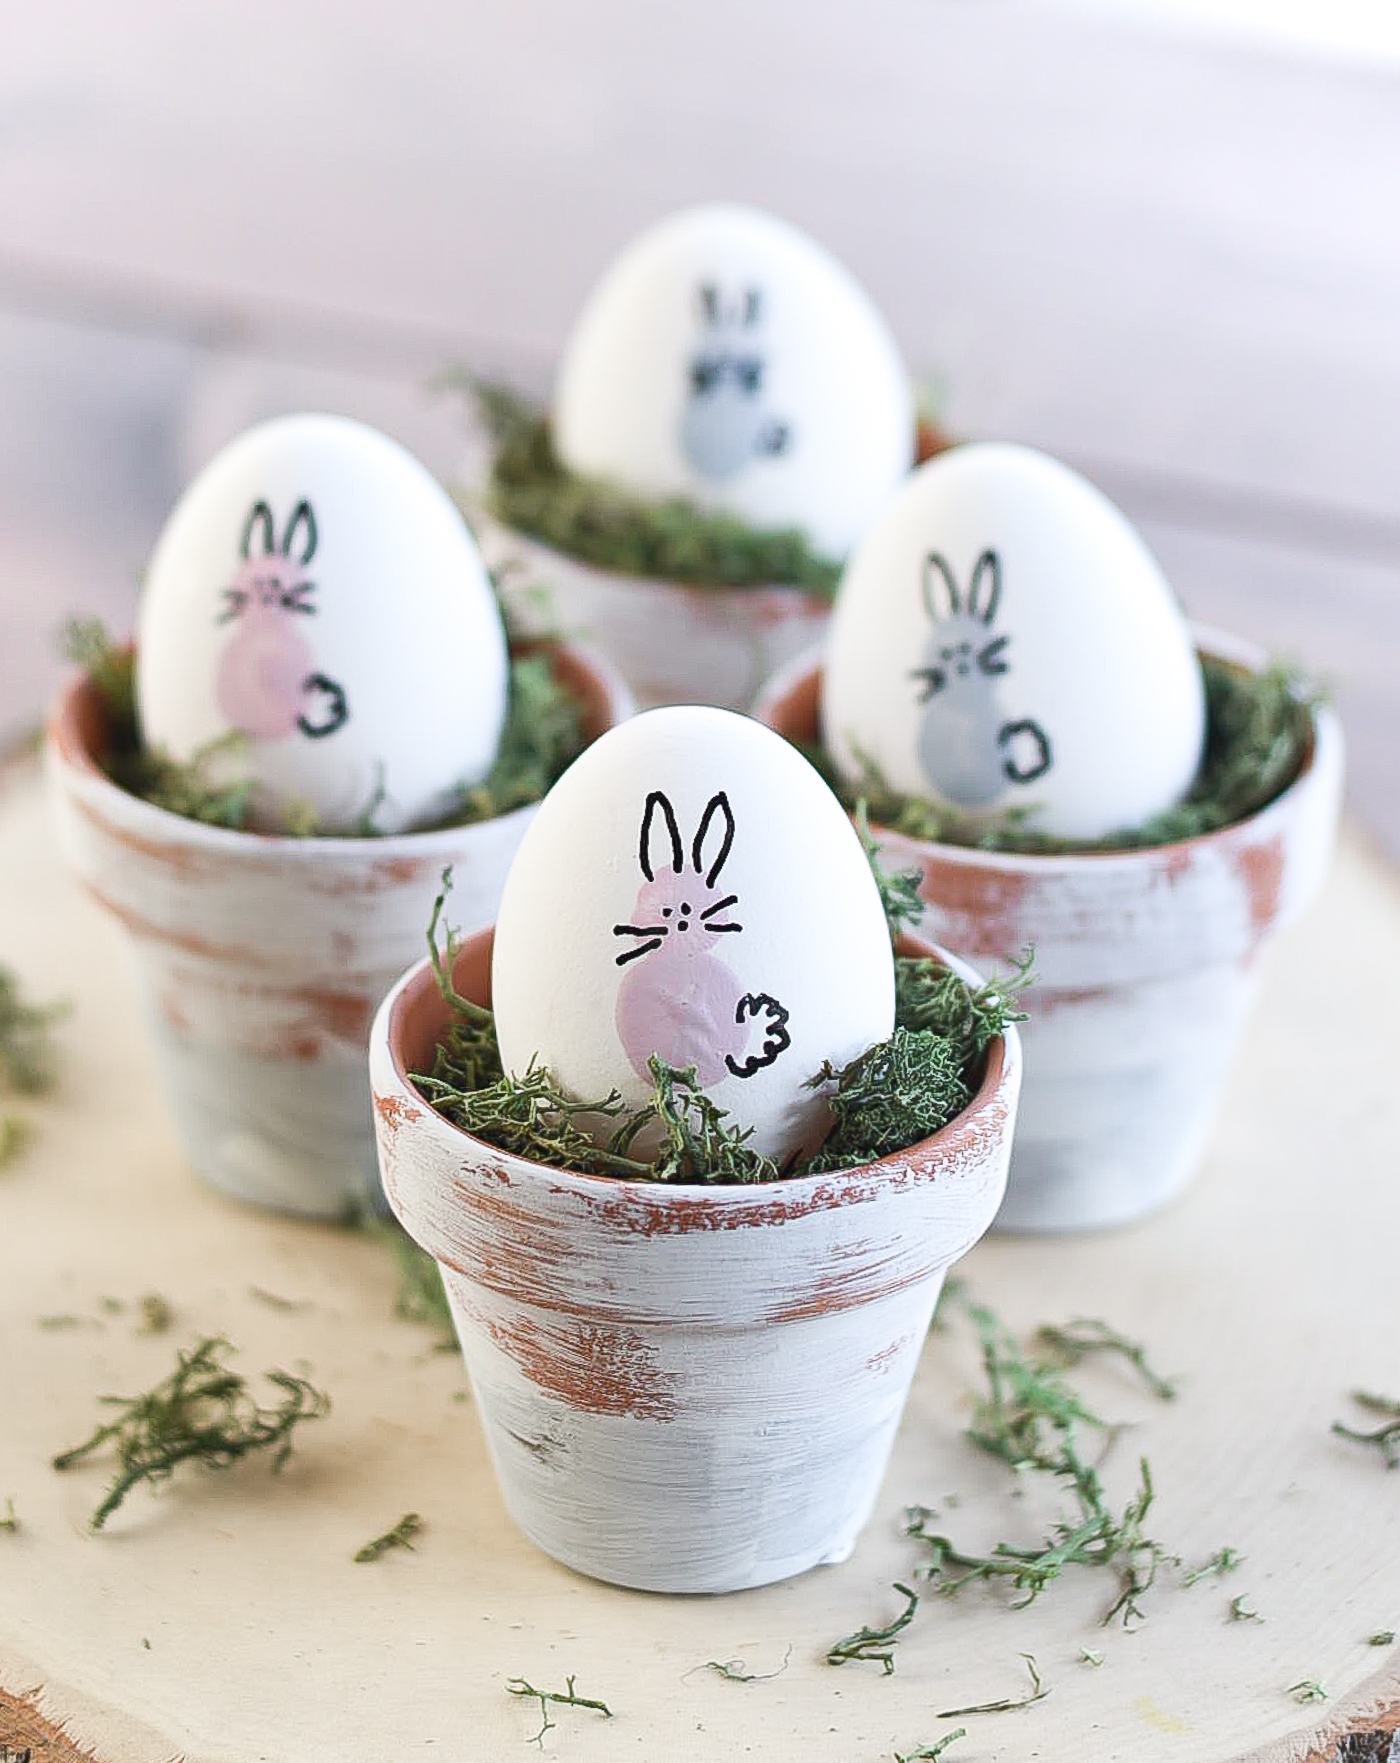 Thumbprint Bunny Easter Eggs. Decorating Eggs with Paint. Easter Egg Decorating Ideas.